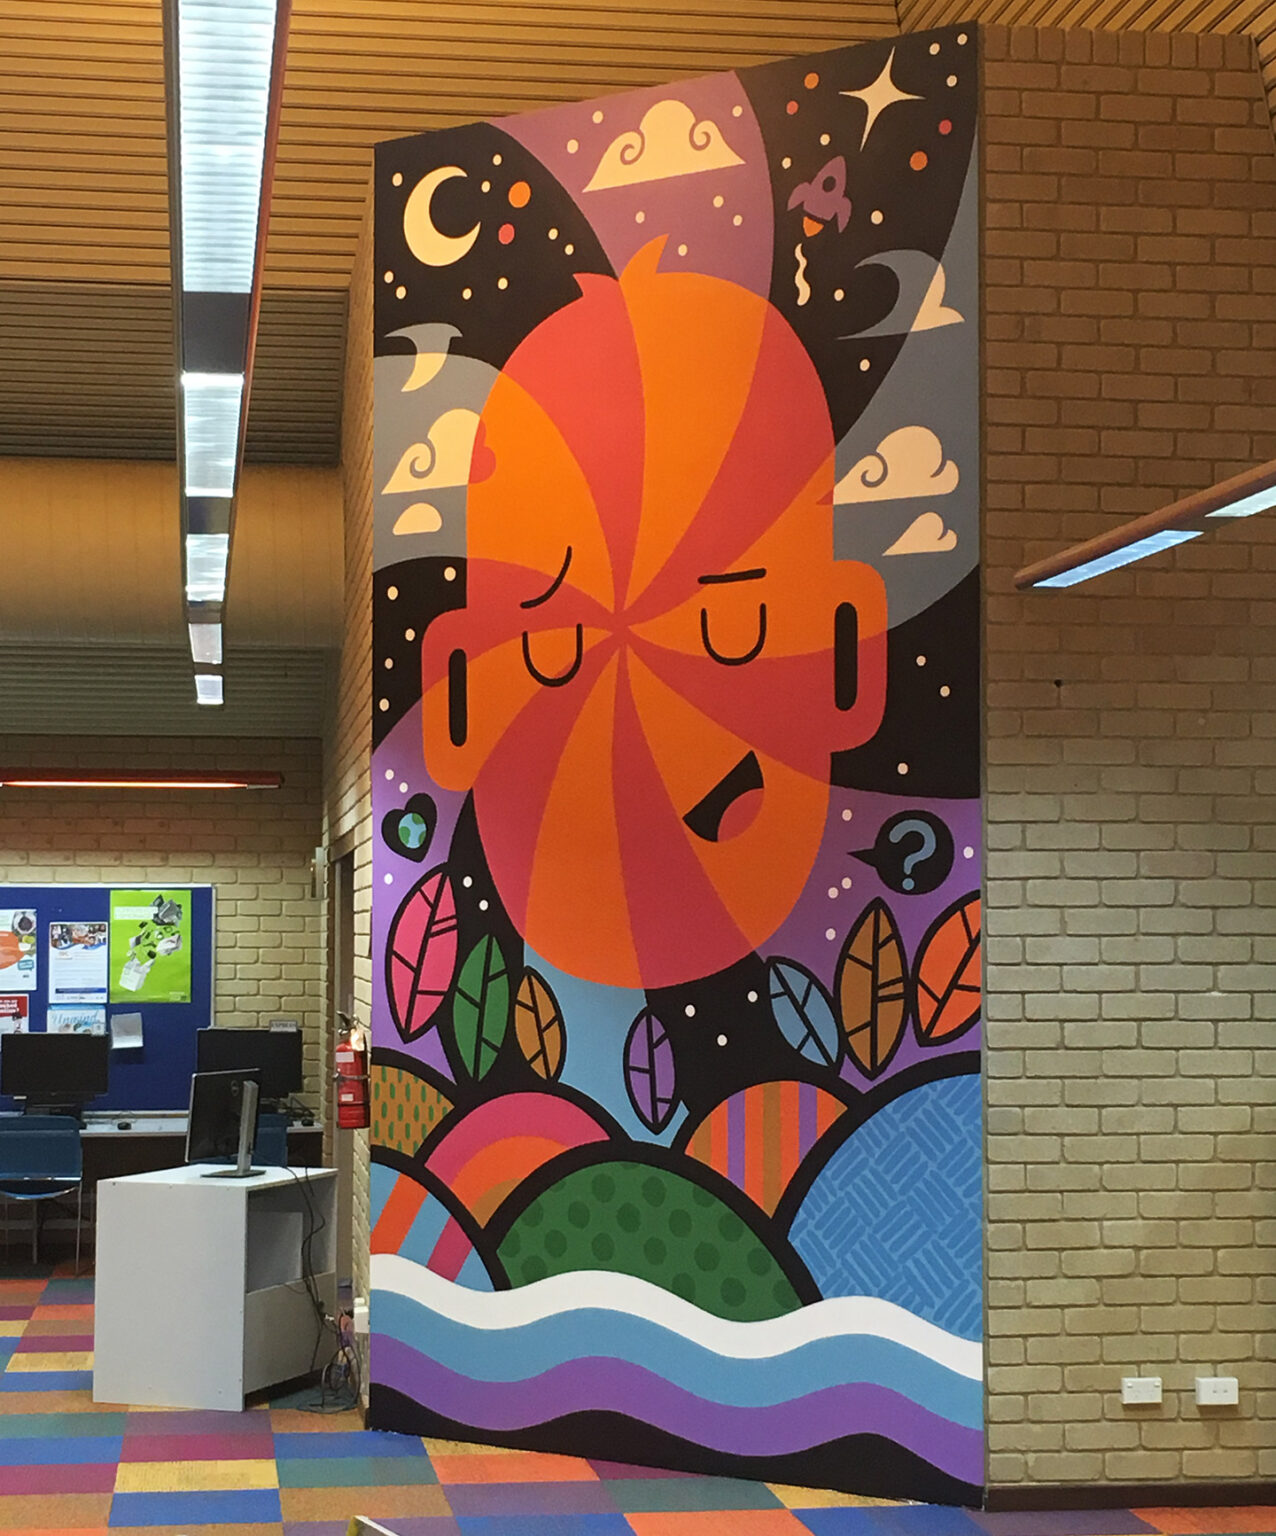 Design and painting by Darren Hutchens - Internal wall murals of the Bentley Library Hub